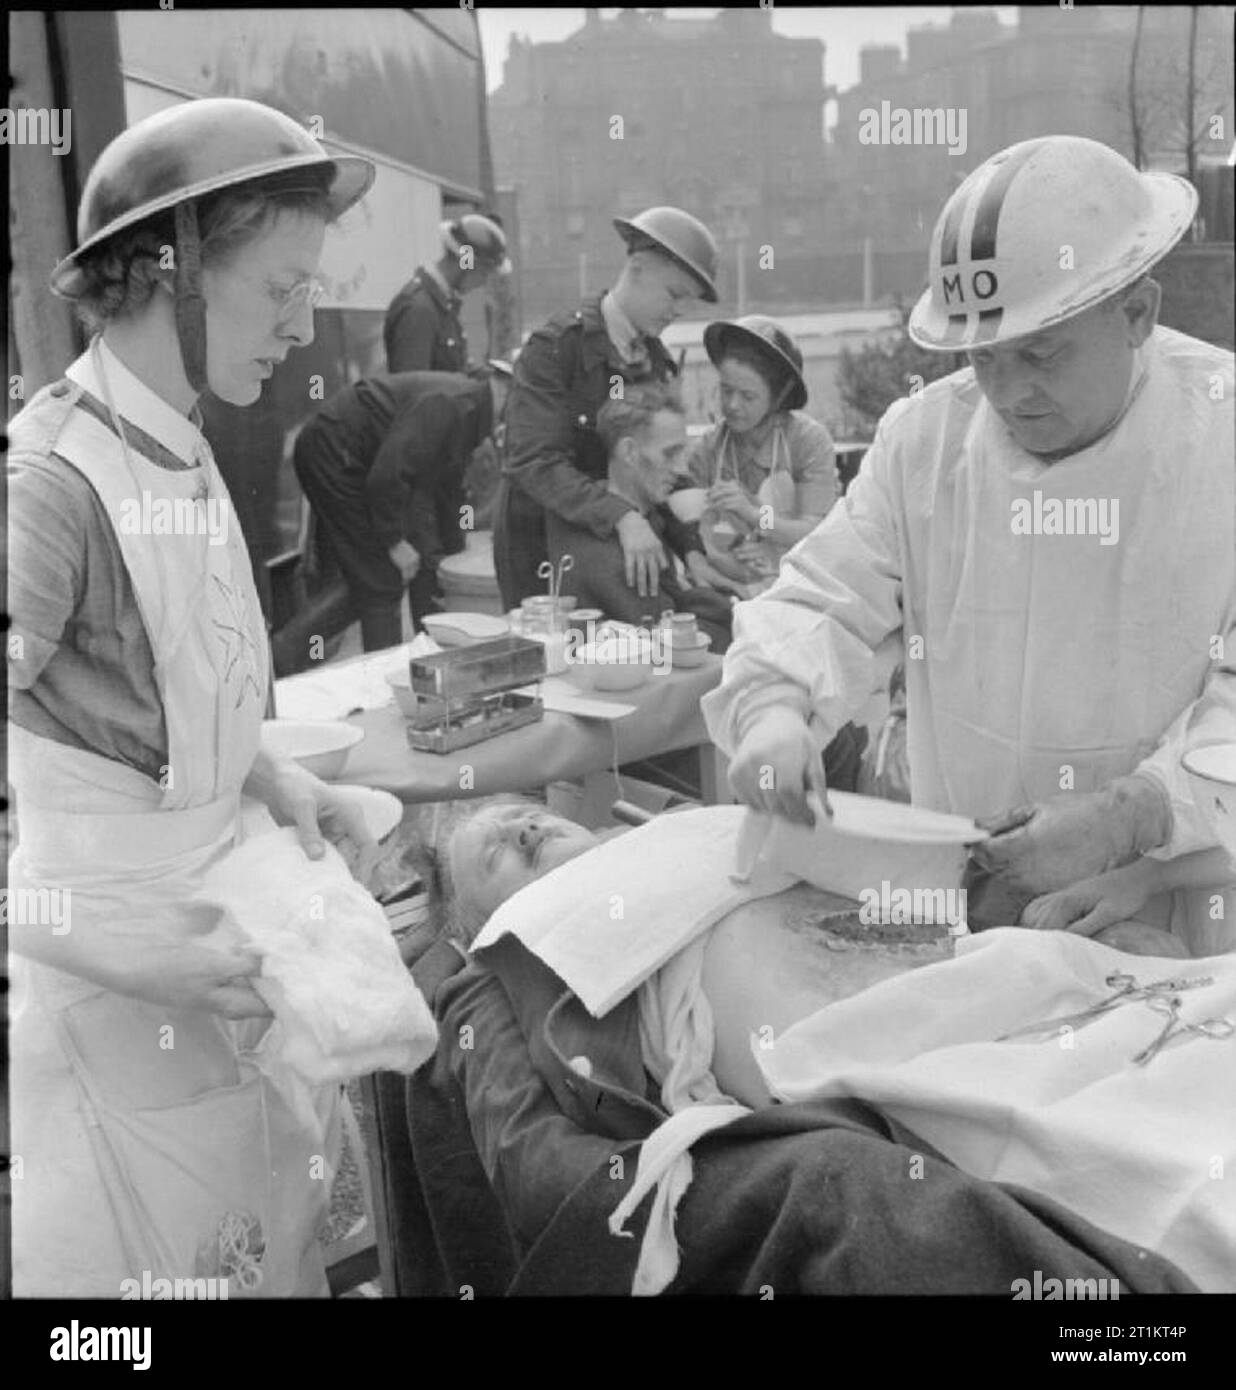 The Reconstruction of 'an Incident'- Civil Defence Training in Fulham, London, 1942 The Medical Officer of the Mobile Medical Unit treats a casualty with a severe abdominal wound, before he is transferred to hospital. The Medical Officer (with the letters 'MO' on his steel helmet) is assisted by a nurse. In the background, Civil Defence Wardens help another casualty to drink a cup of tea. This photograph was taken at the end of Edith Villas, where it butts up to West Cromwell Road/Conan Street, looking towards Conan Street, which runs at right angles to Edith Villas. Stock Photo